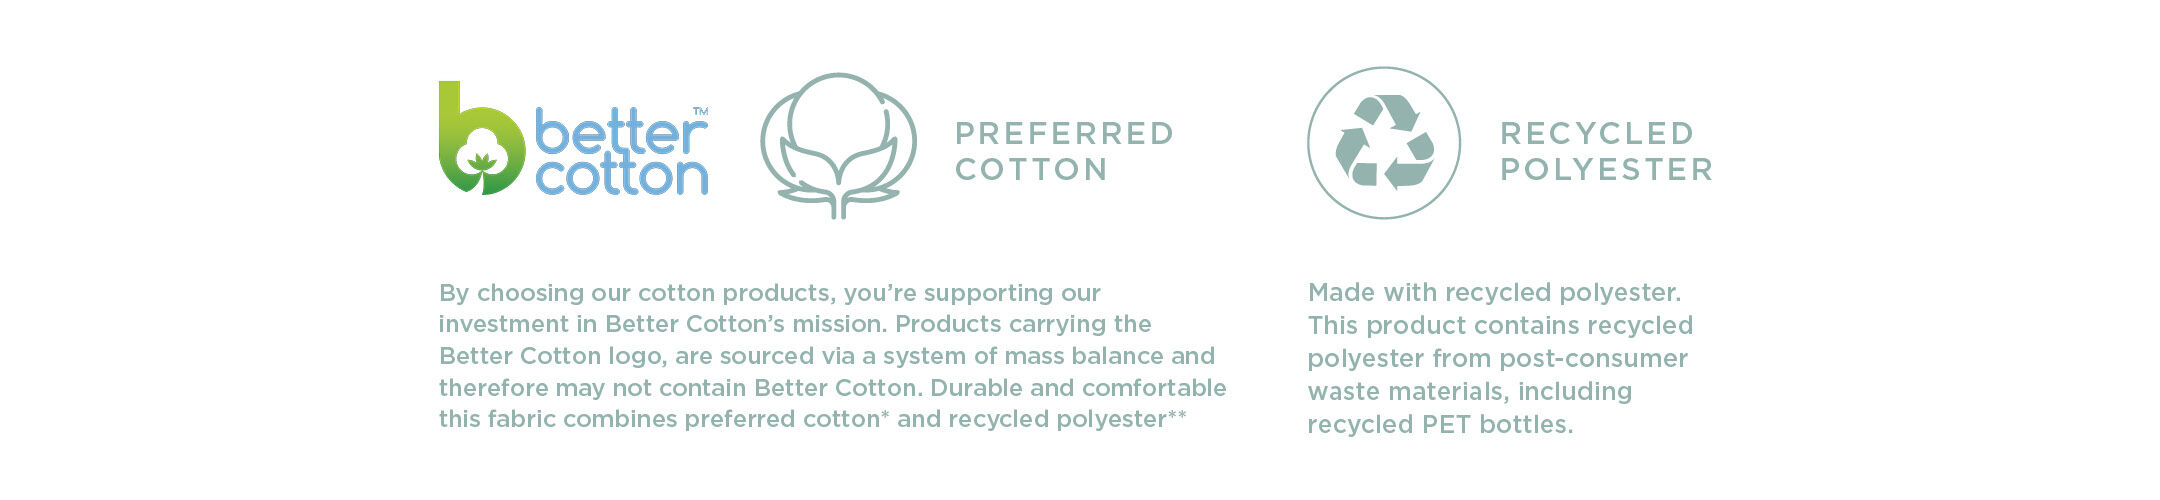 By choosing our cotton products, you’re supporting our investment in Better Cotton’s mission. Products carrying the Better Cotton logo, are sourced via a system of mass balance and therefore may not contain Better Cotton. Durable and comfortable this fabric combines preferred cotton* and recycled polyester**